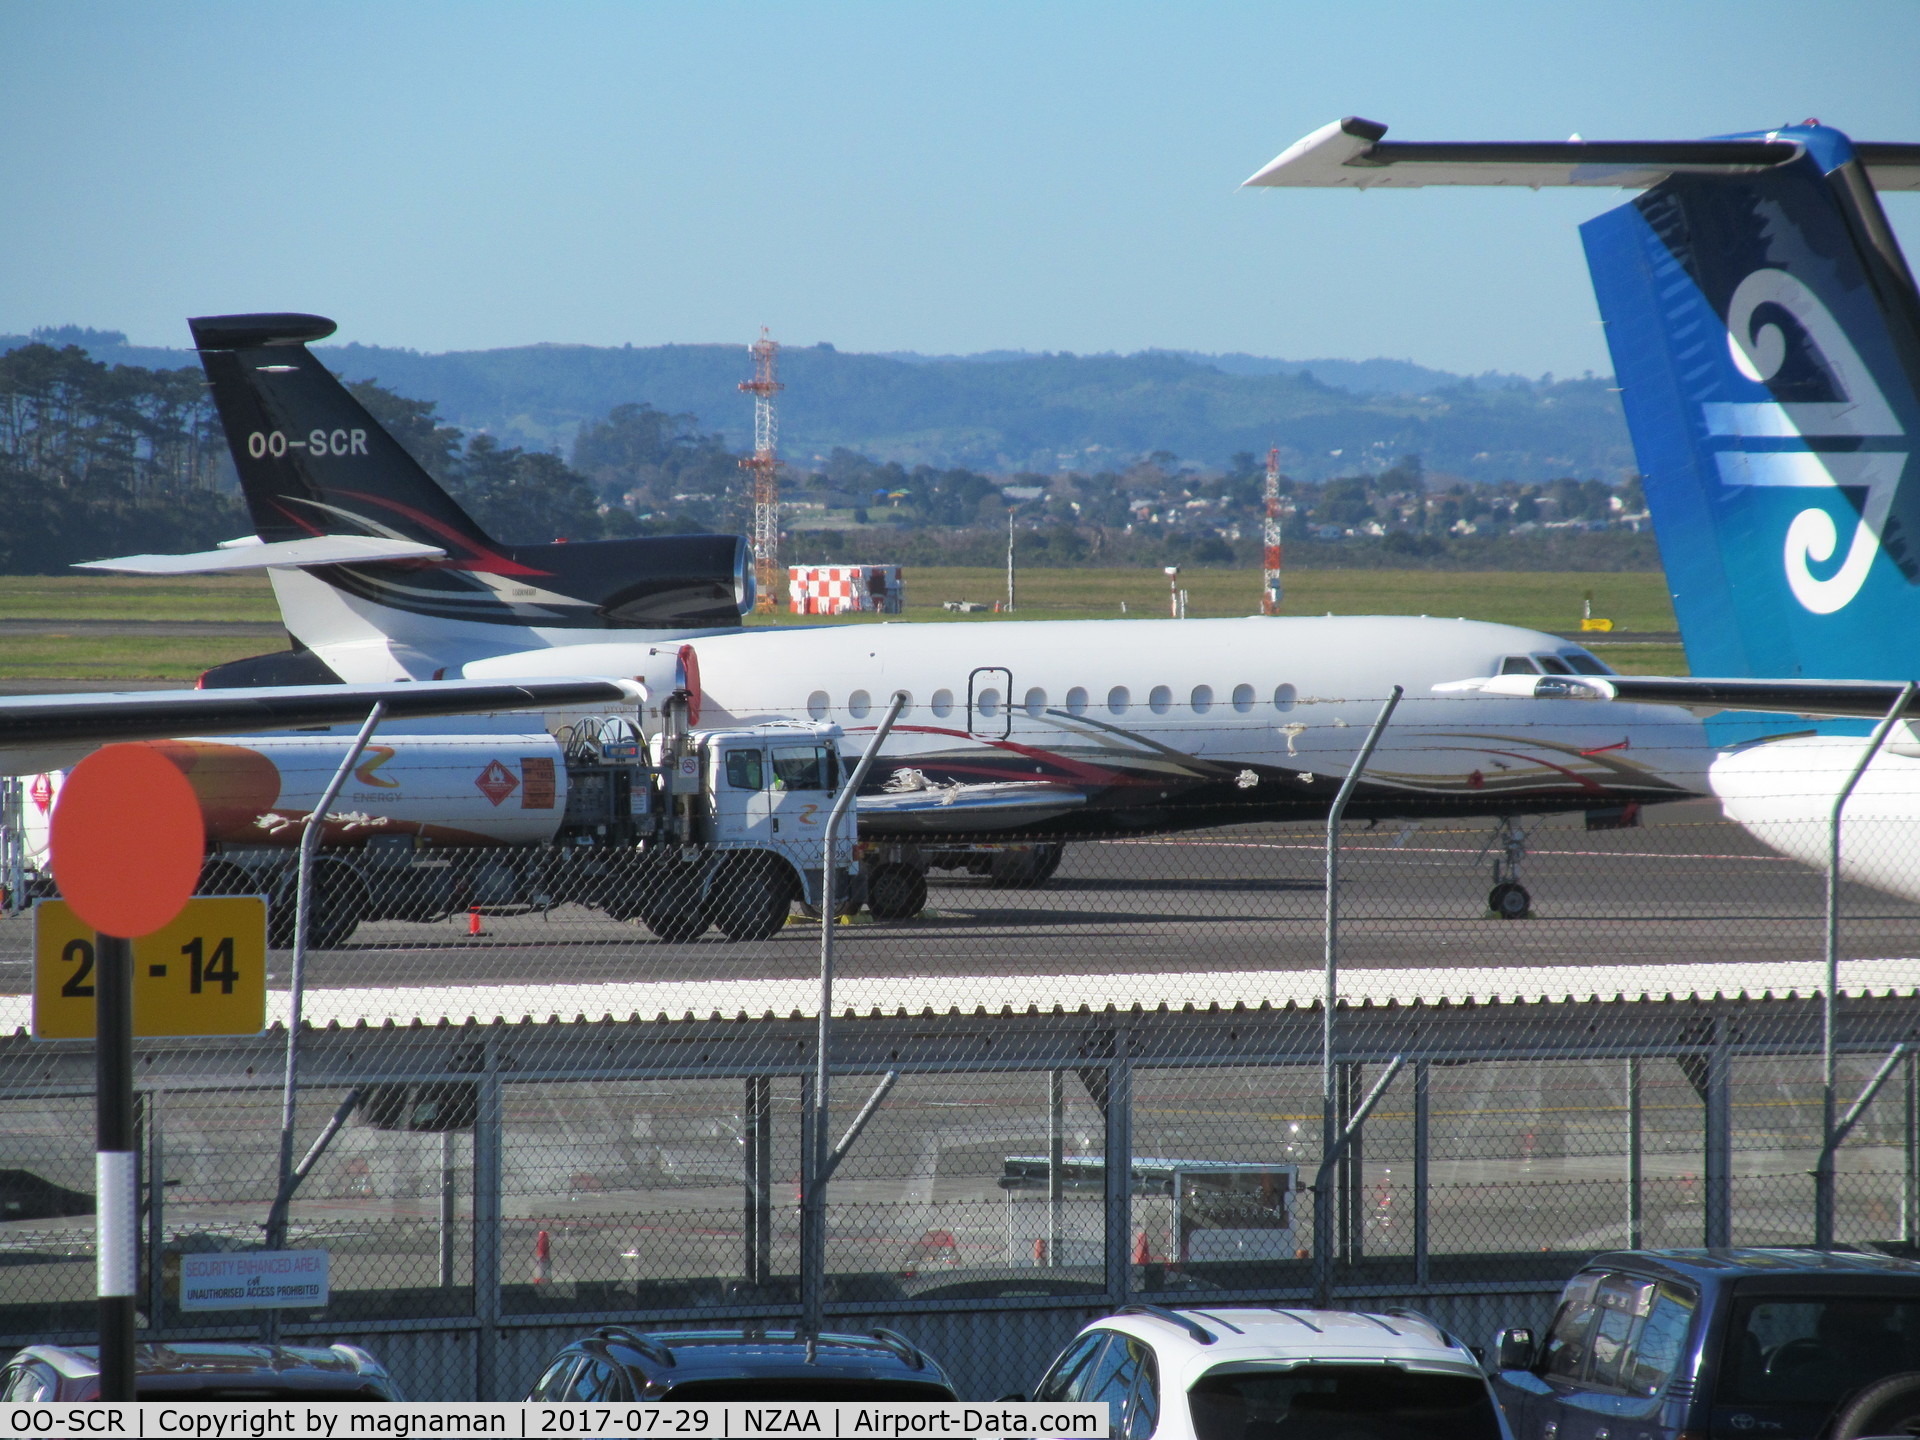 OO-SCR, 2004 Dassault Falcon 900EX C/N 130, from car park roof across apron